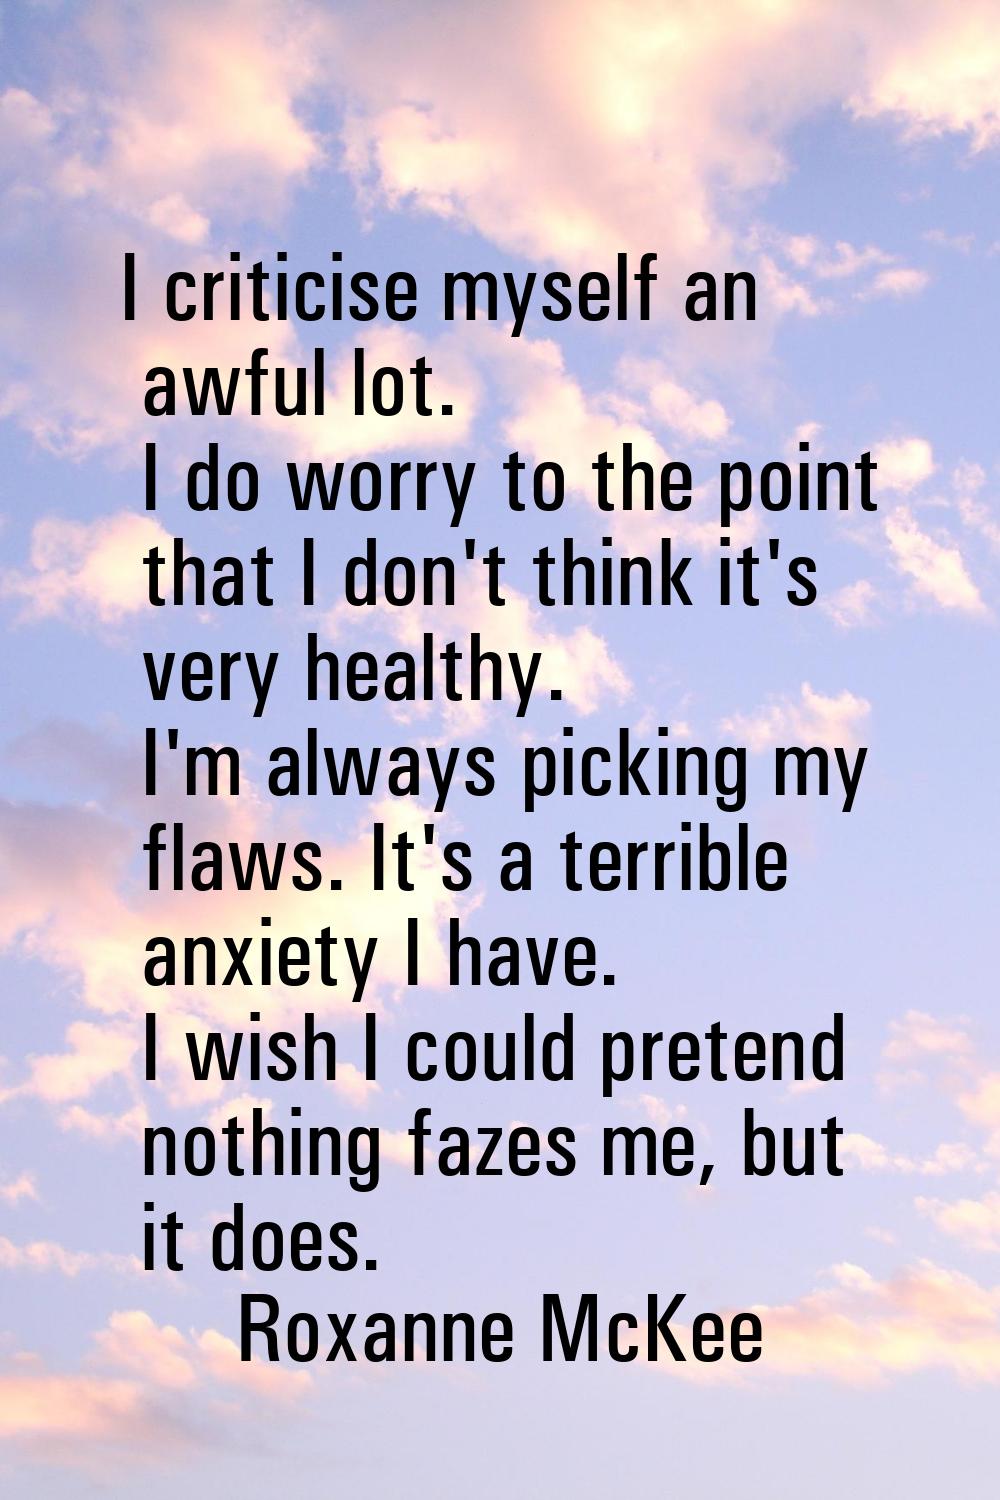 I criticise myself an awful lot. I do worry to the point that I don't think it's very healthy. I'm 